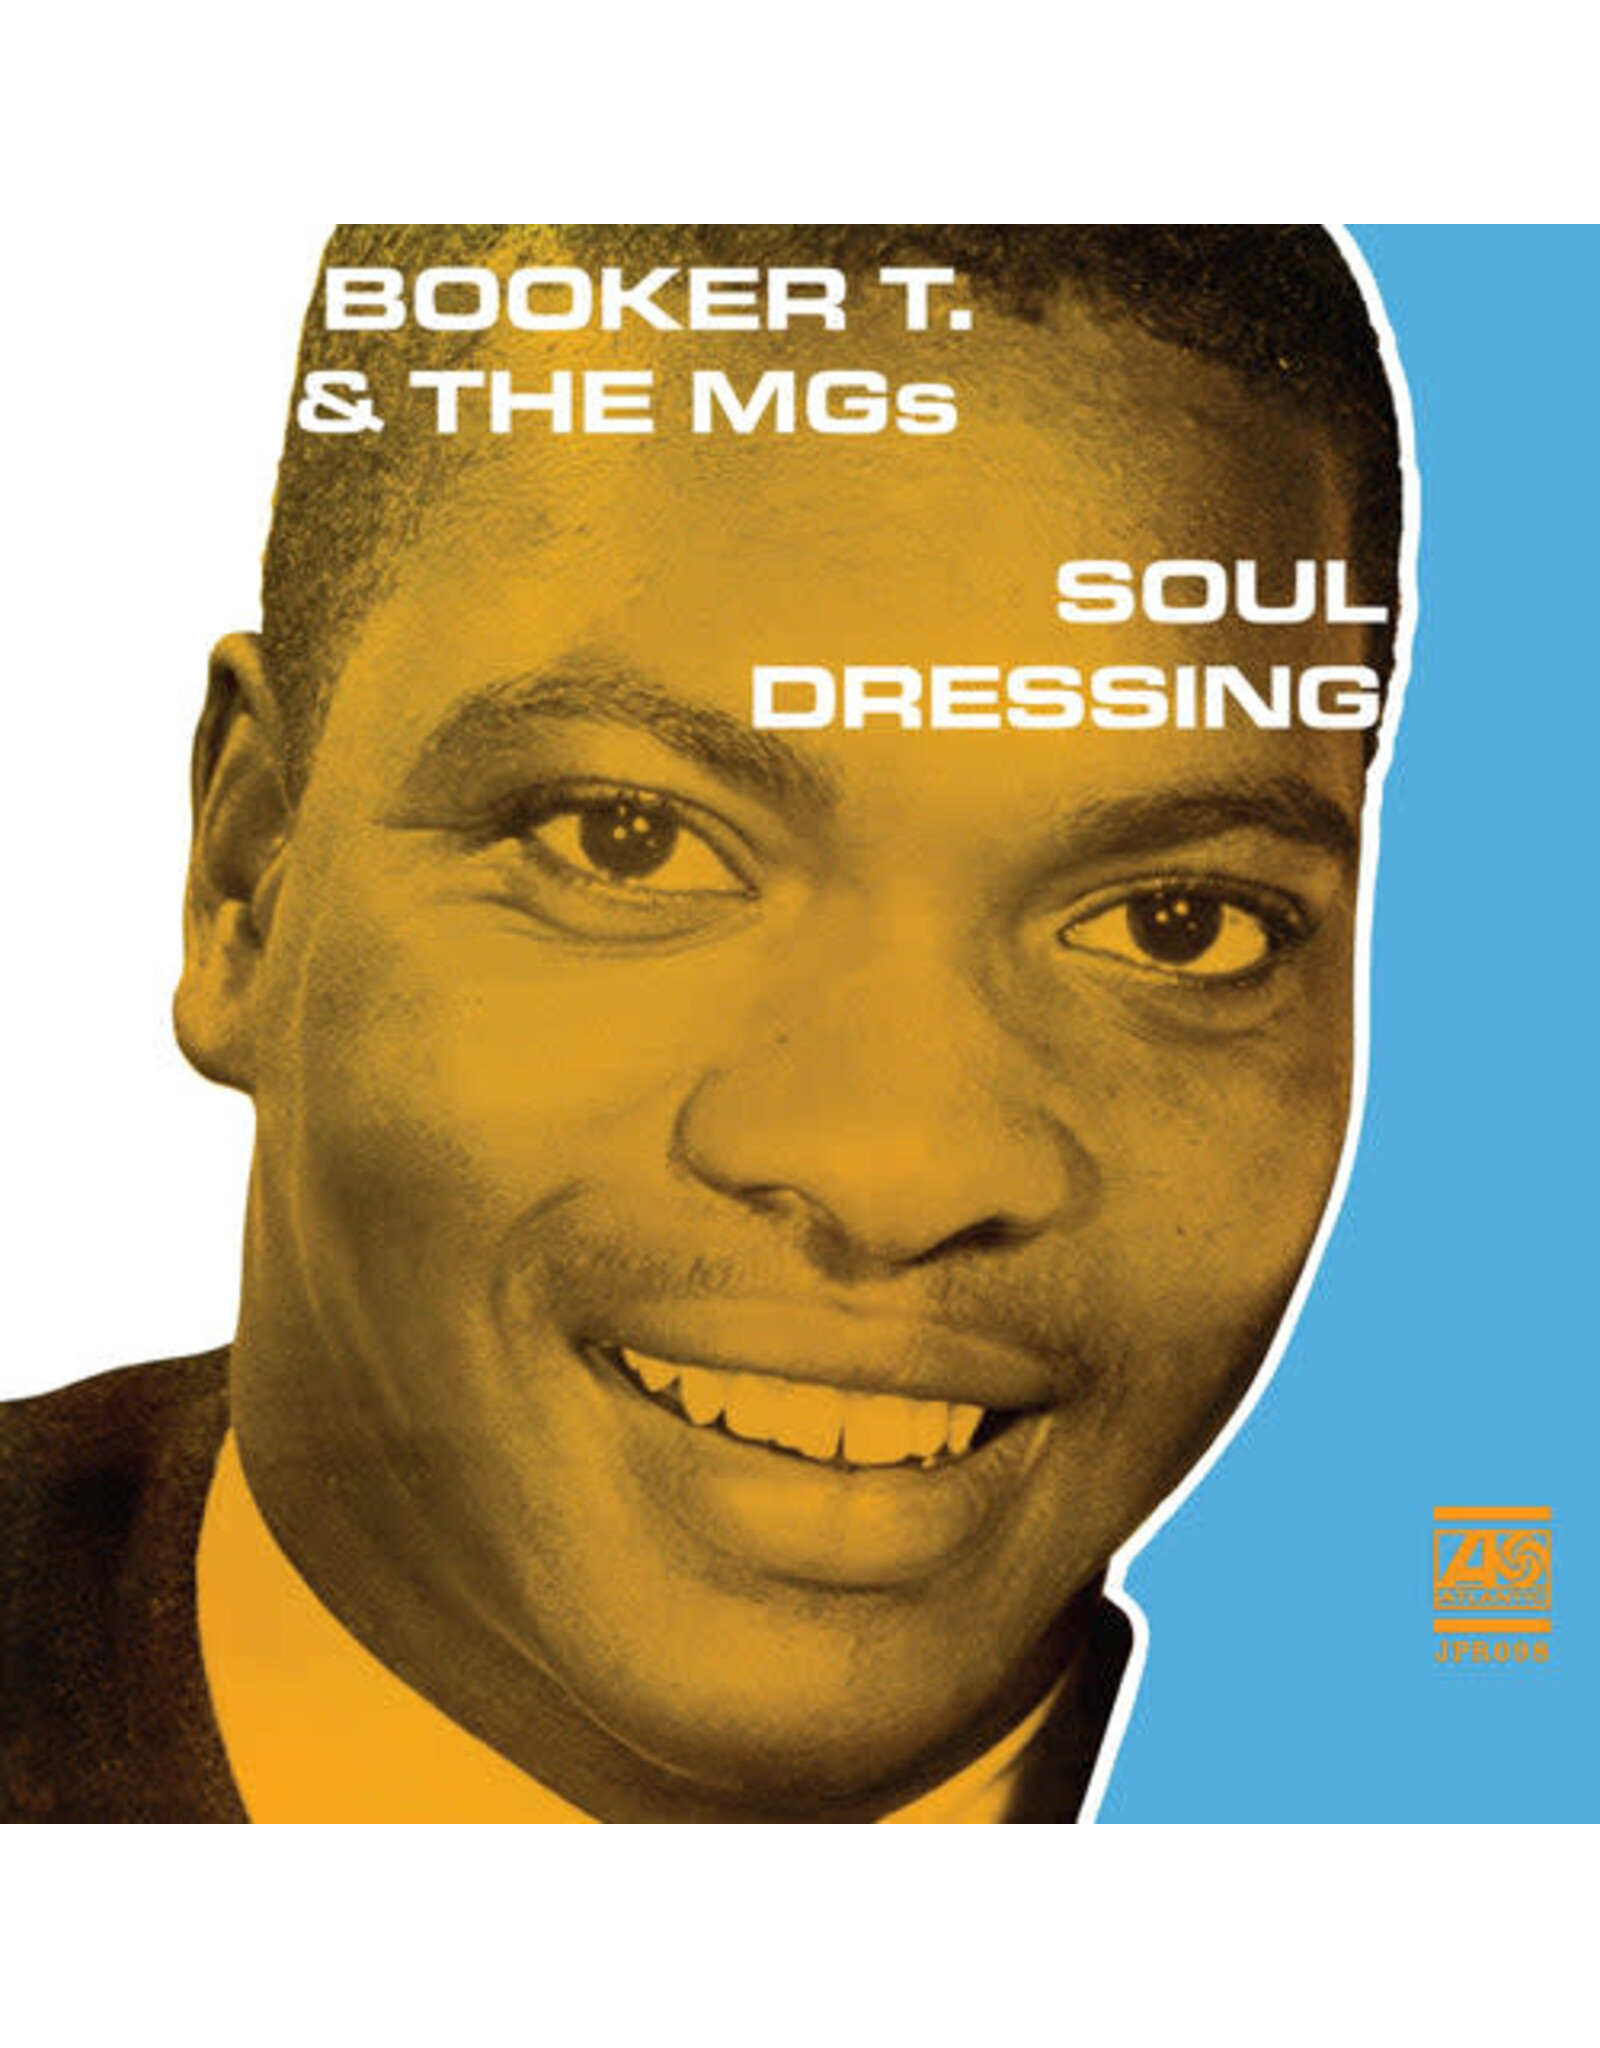 Jackpot Records Booker T & the MG's - Soul Dressing (Mono) - Clear Vinyl LP